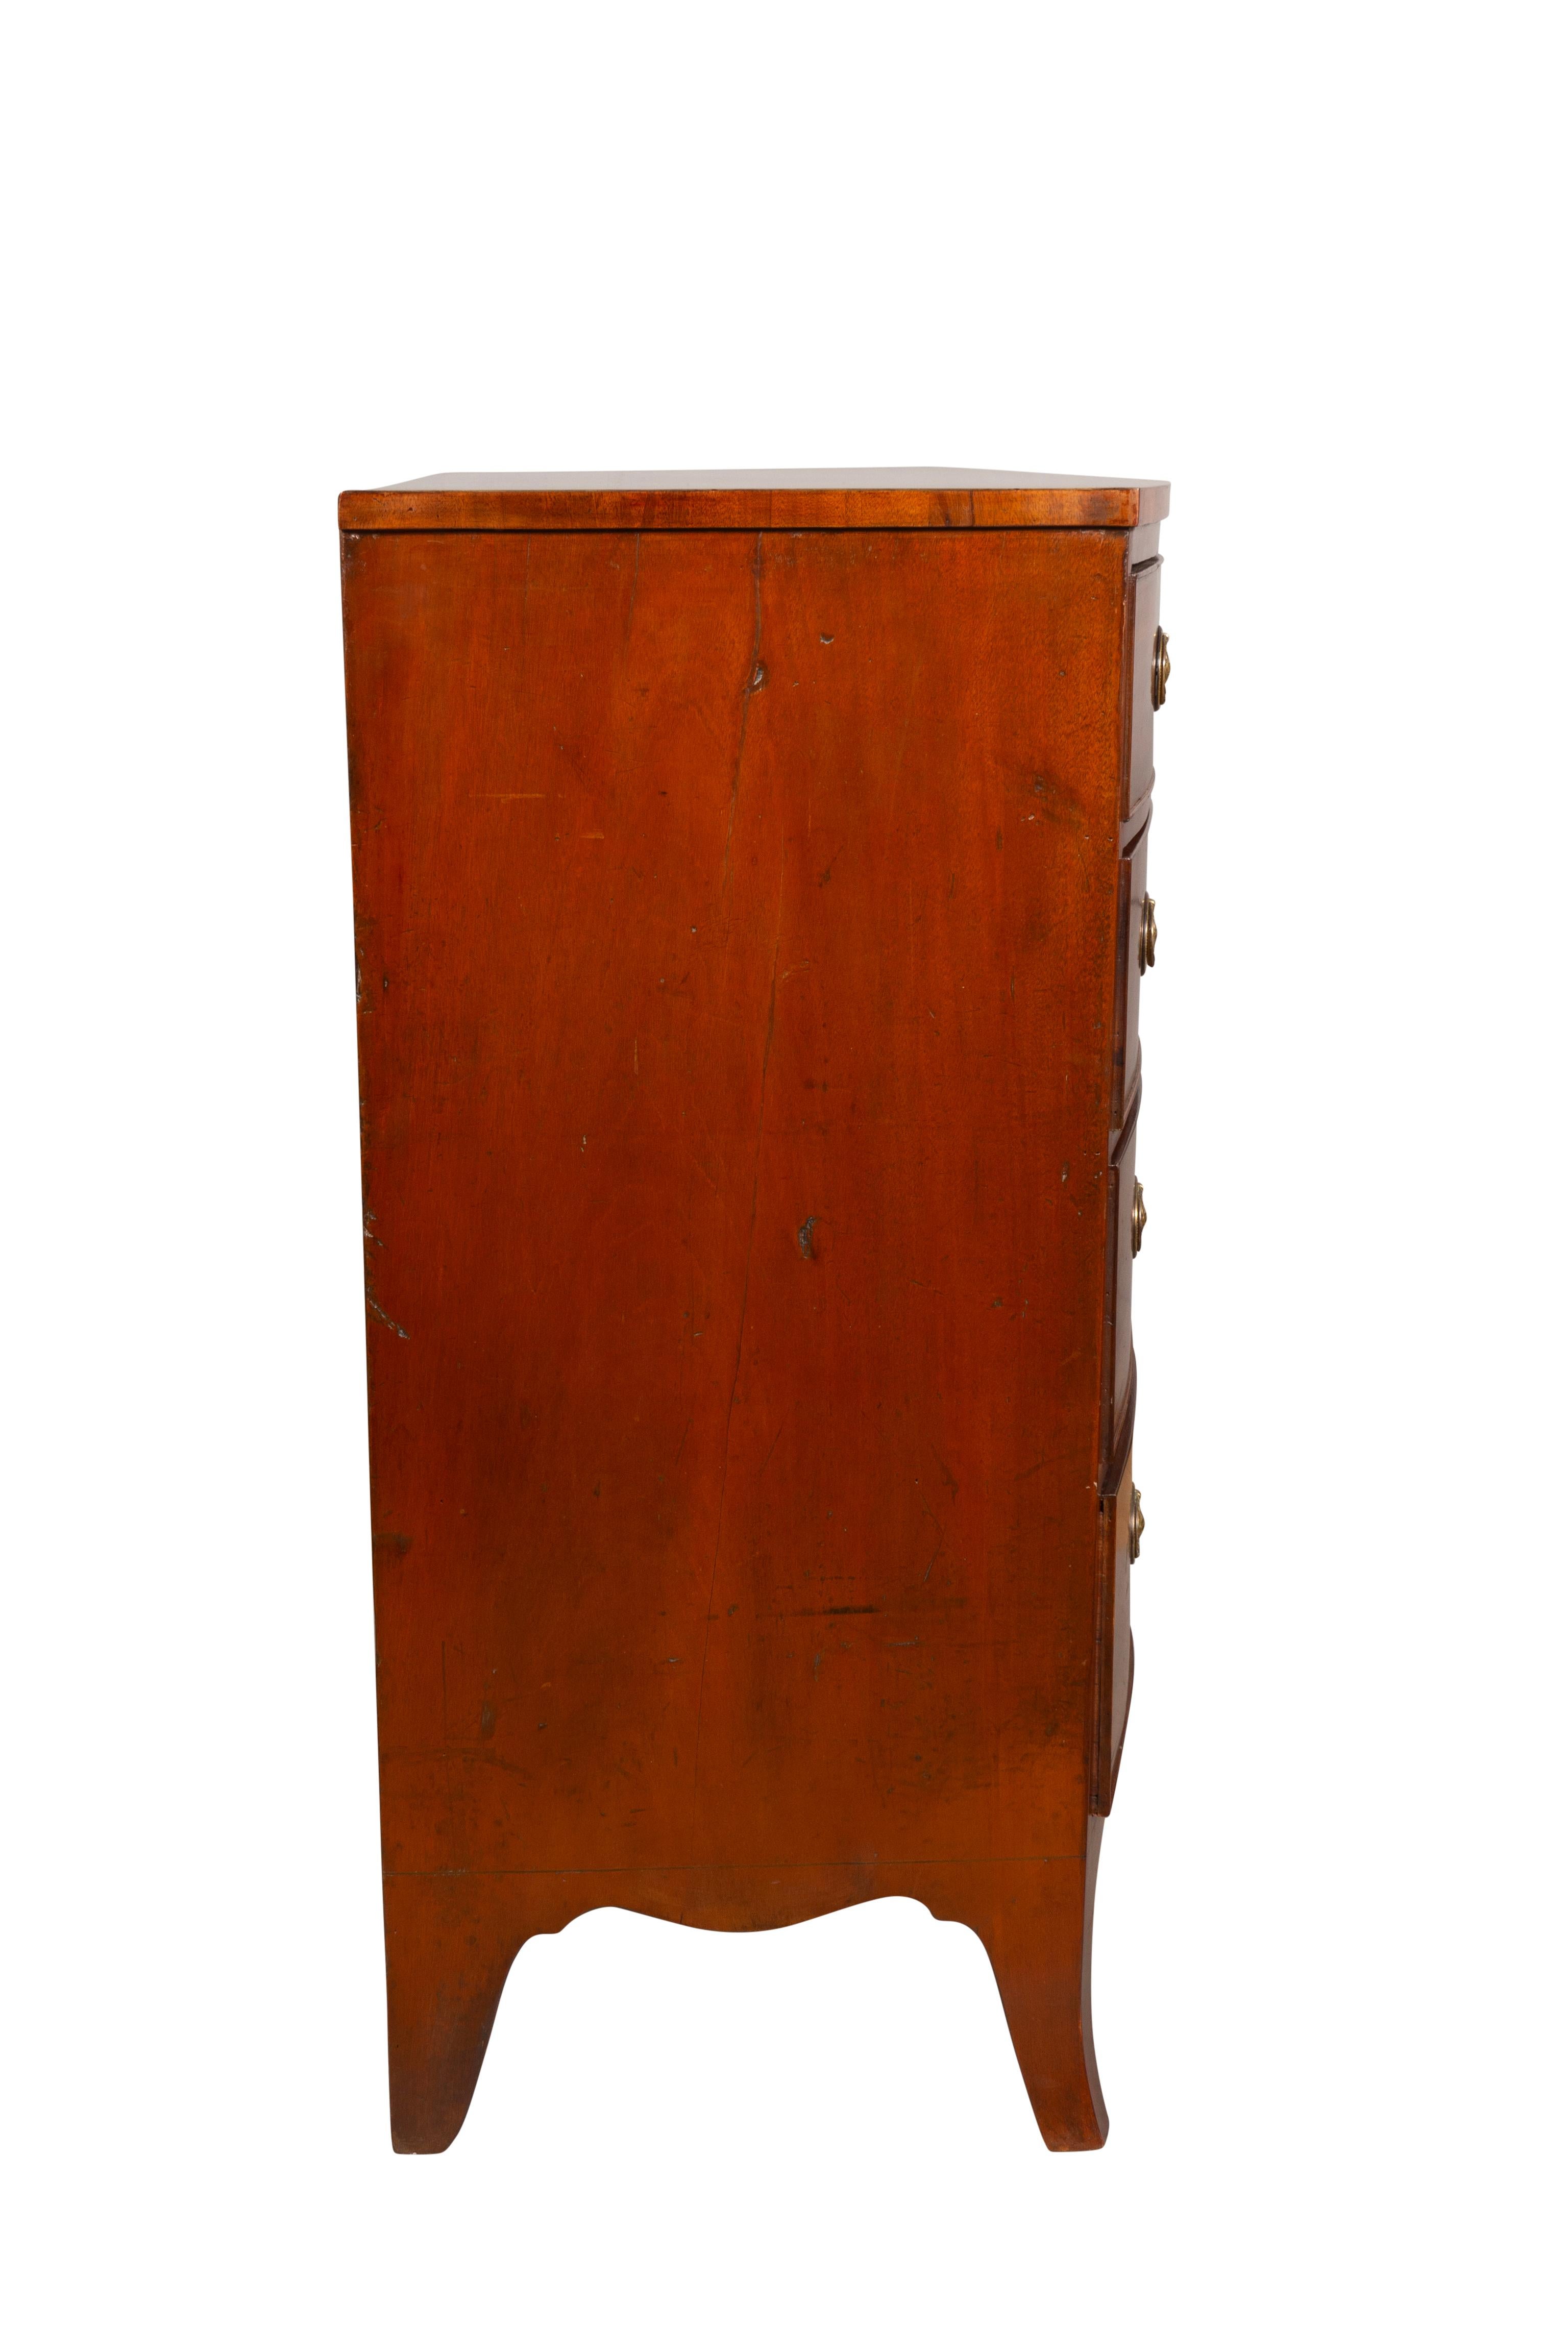 English Regency Mahogany Bow front Chest Of Drawers For Sale